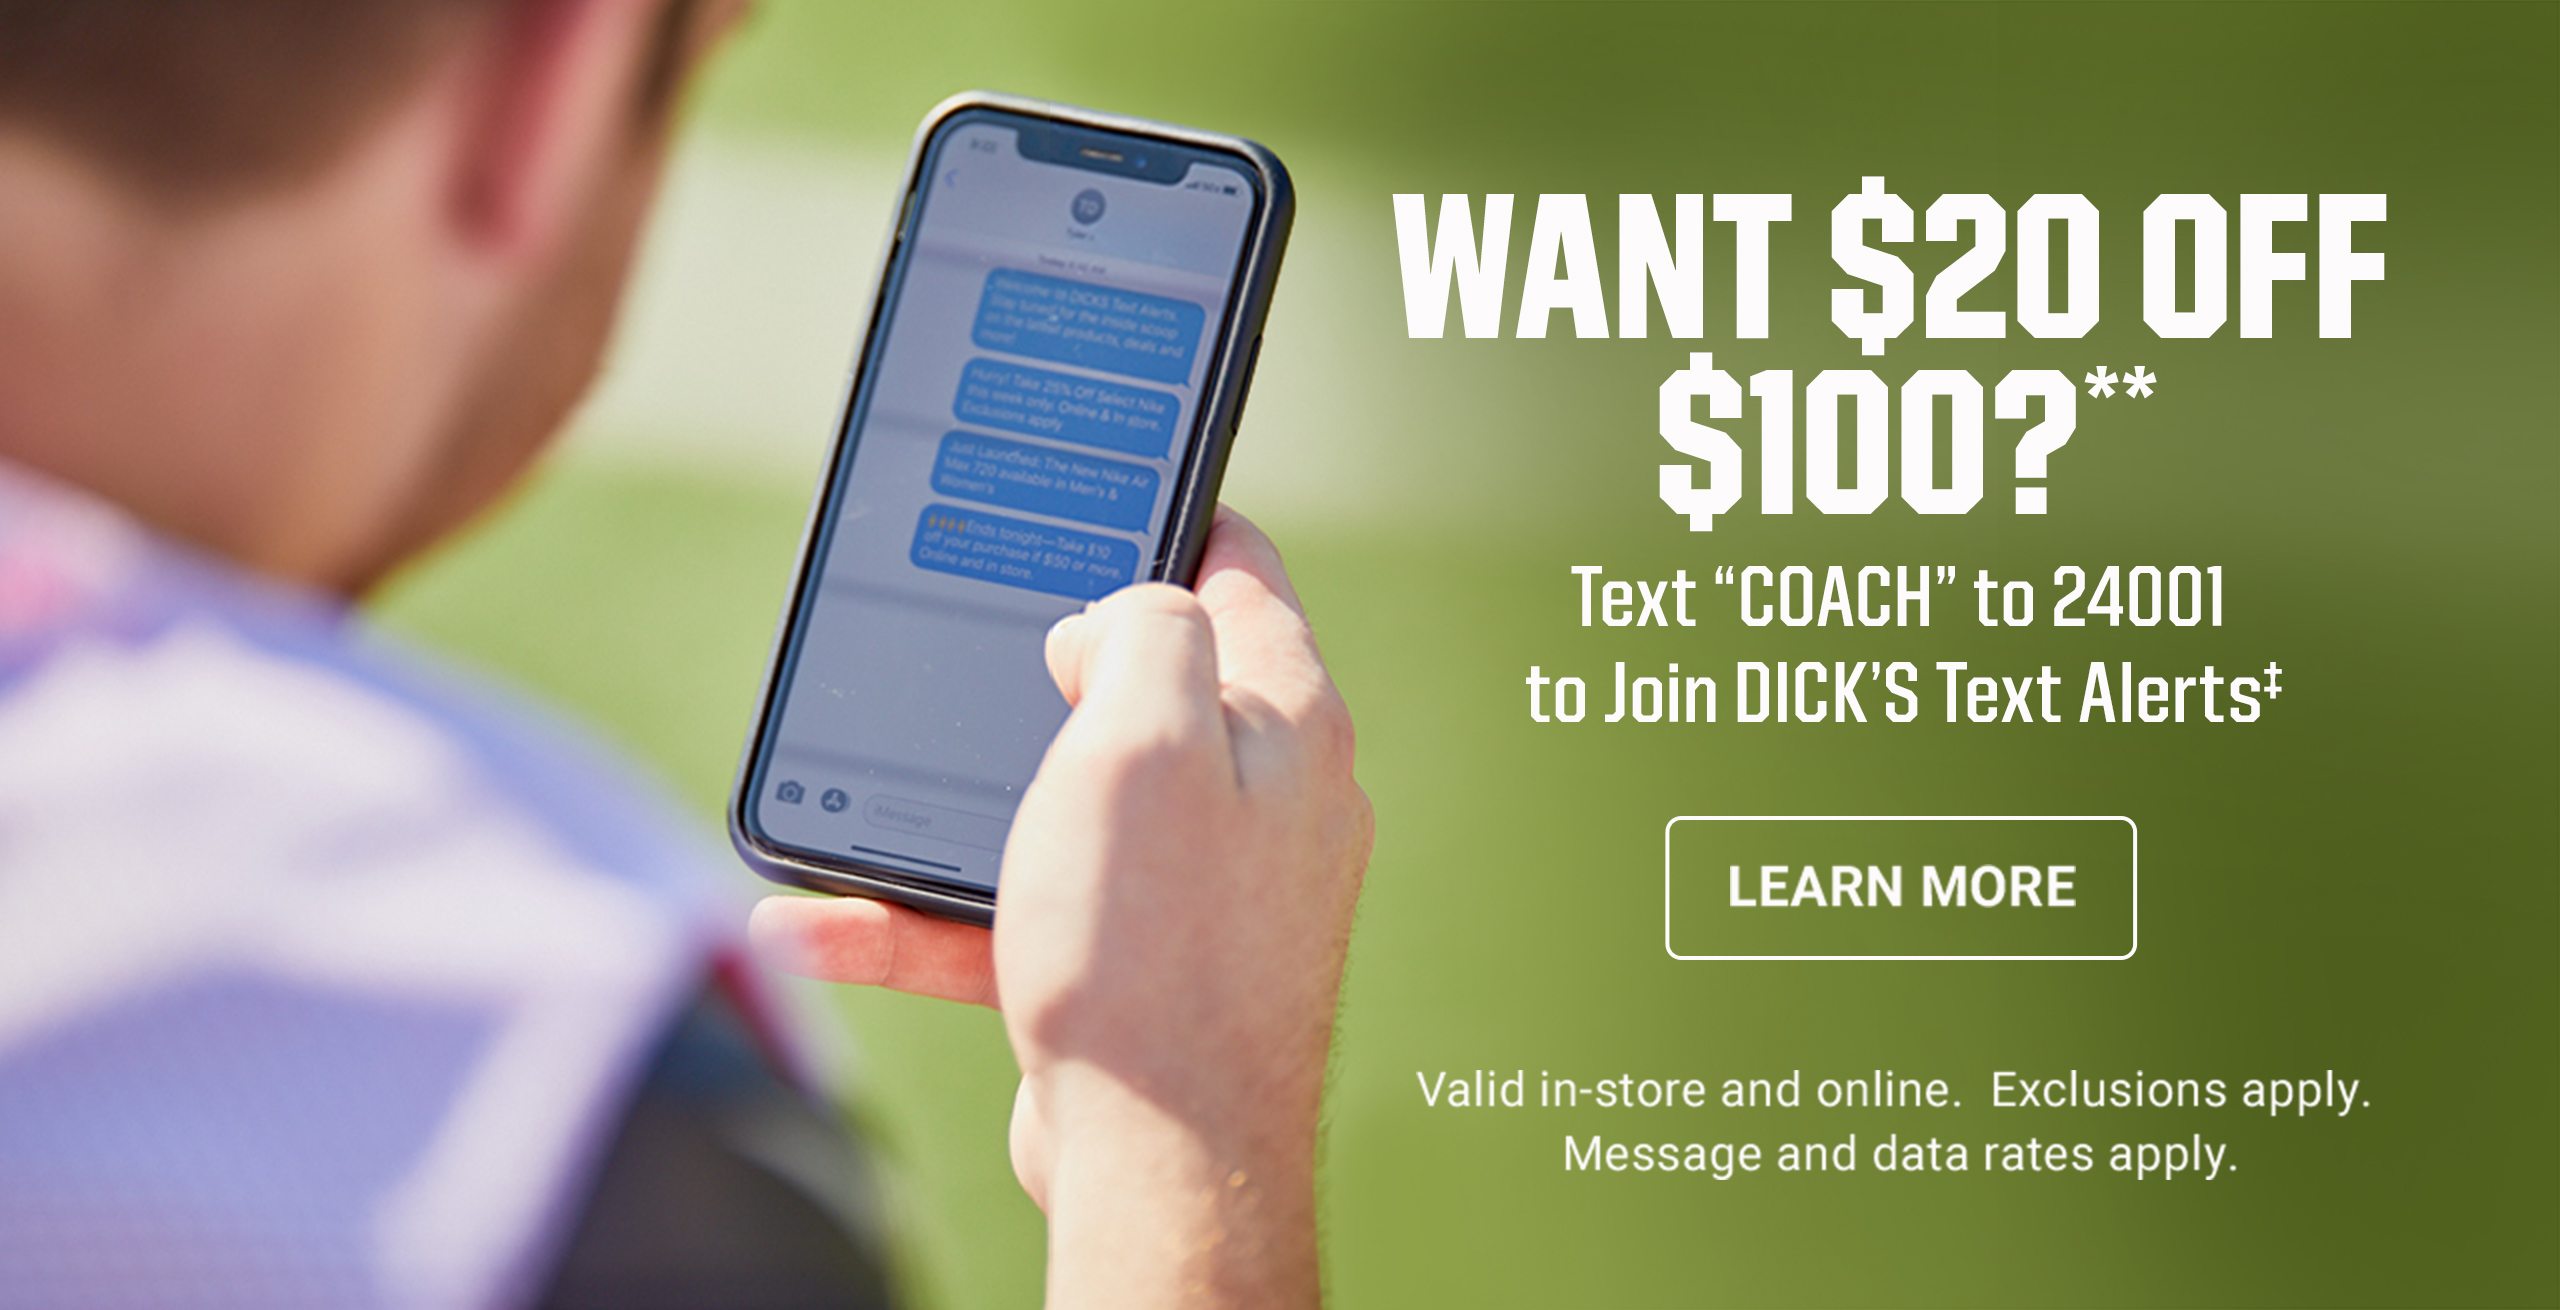 Want $20 off $100?**. Text Coach to 24001 to join Dick's text alerts. Learn More. Valid in-store and online. Exclusions apply. Message and data rates apply.